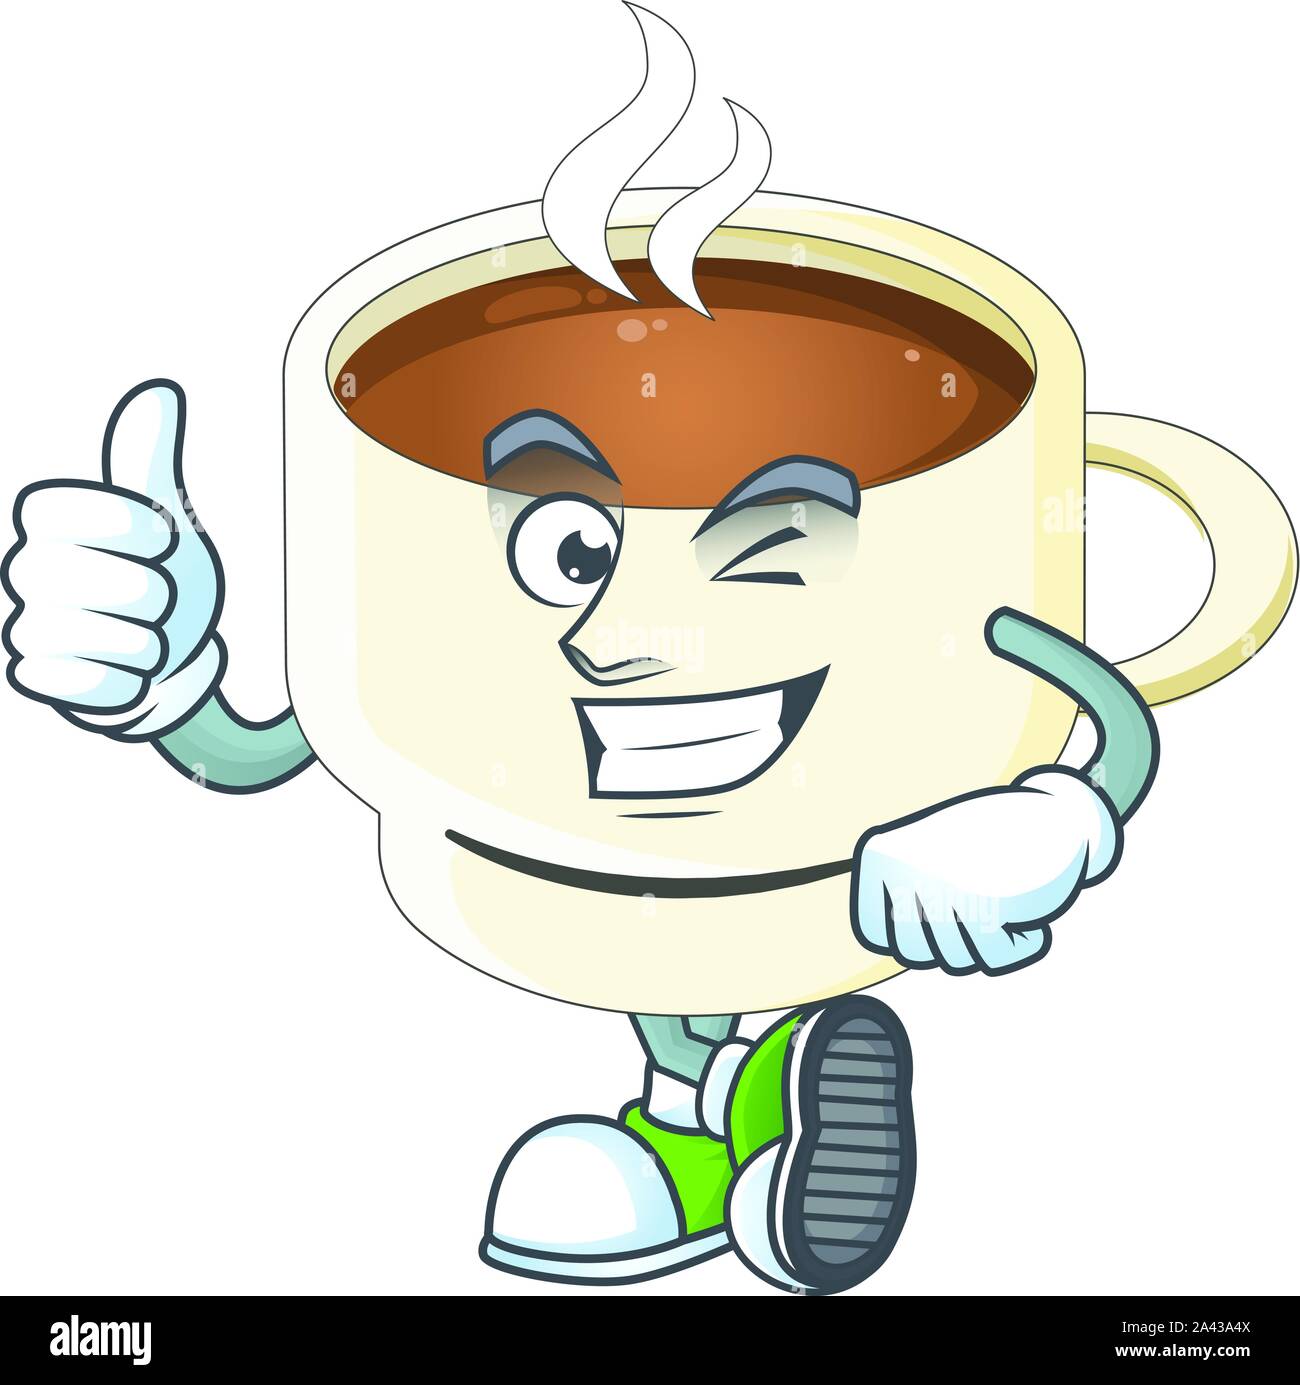 https://c8.alamy.com/comp/2A43A4X/thumbs-up-character-cup-coffee-in-cartoon-mascot-2A43A4X.jpg